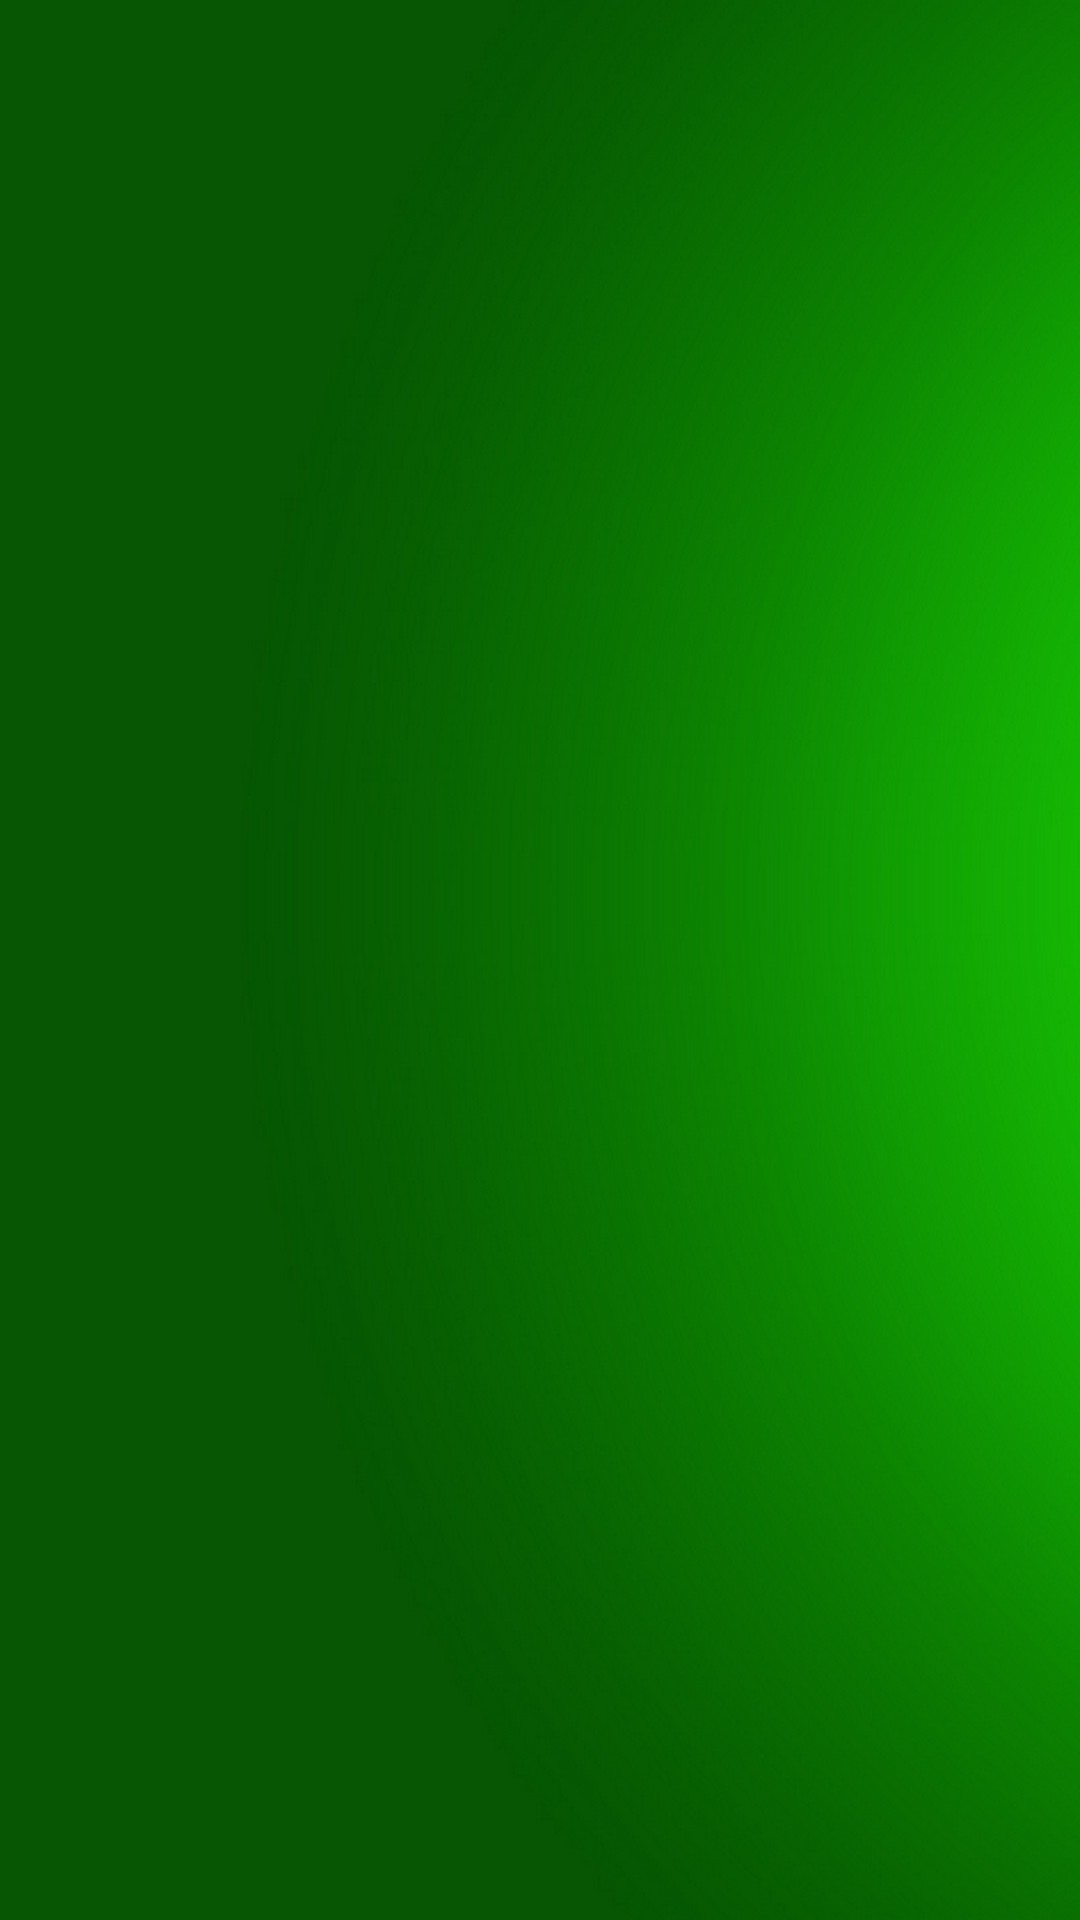 Green iPhone Wallpaper with resolution 1080X1920 pixel. You can make this wallpaper for your iPhone 5, 6, 7, 8, X backgrounds, Mobile Screensaver, or iPad Lock Screen